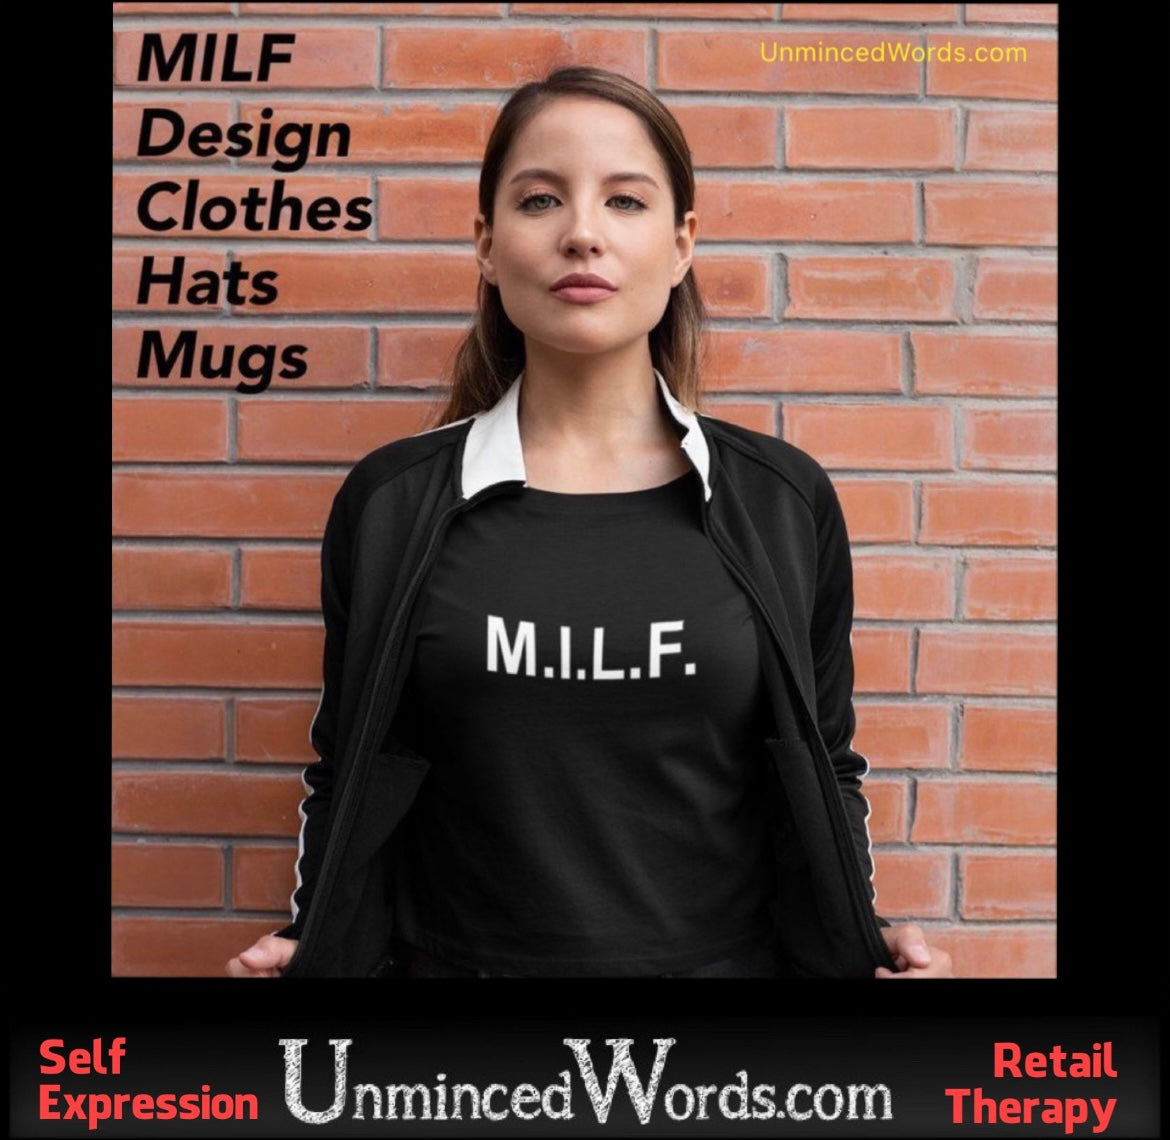 The MILF collection is a sexy, hot seller